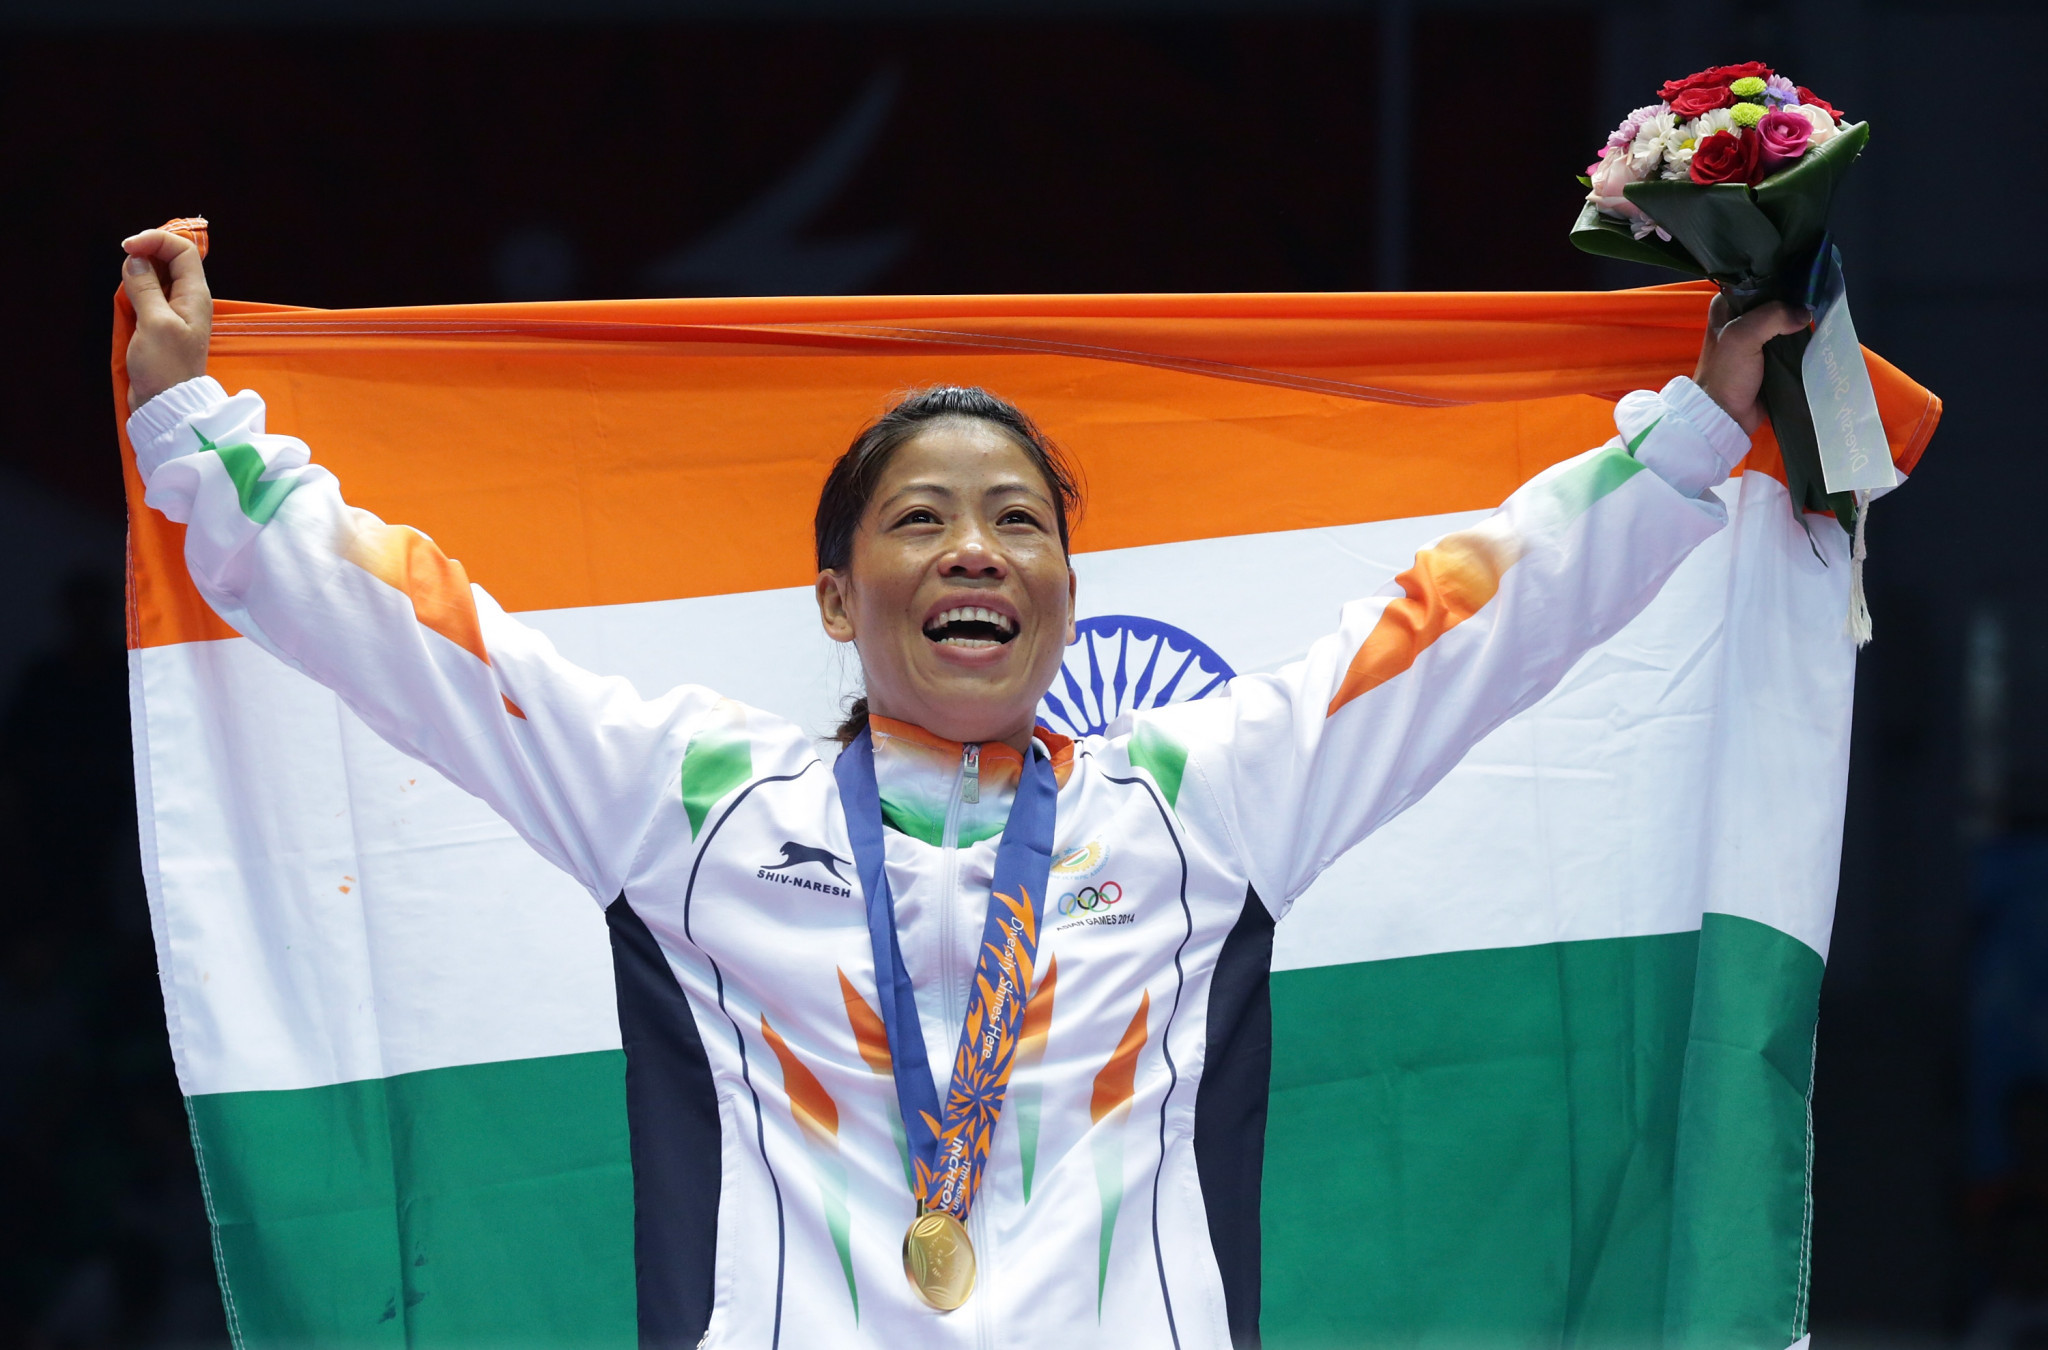 Mary Kom, who claimed gold at the 2014 Asian Games in Incheon, is aiming to bow out with more success in Hangzhou later this year ©Getty Images